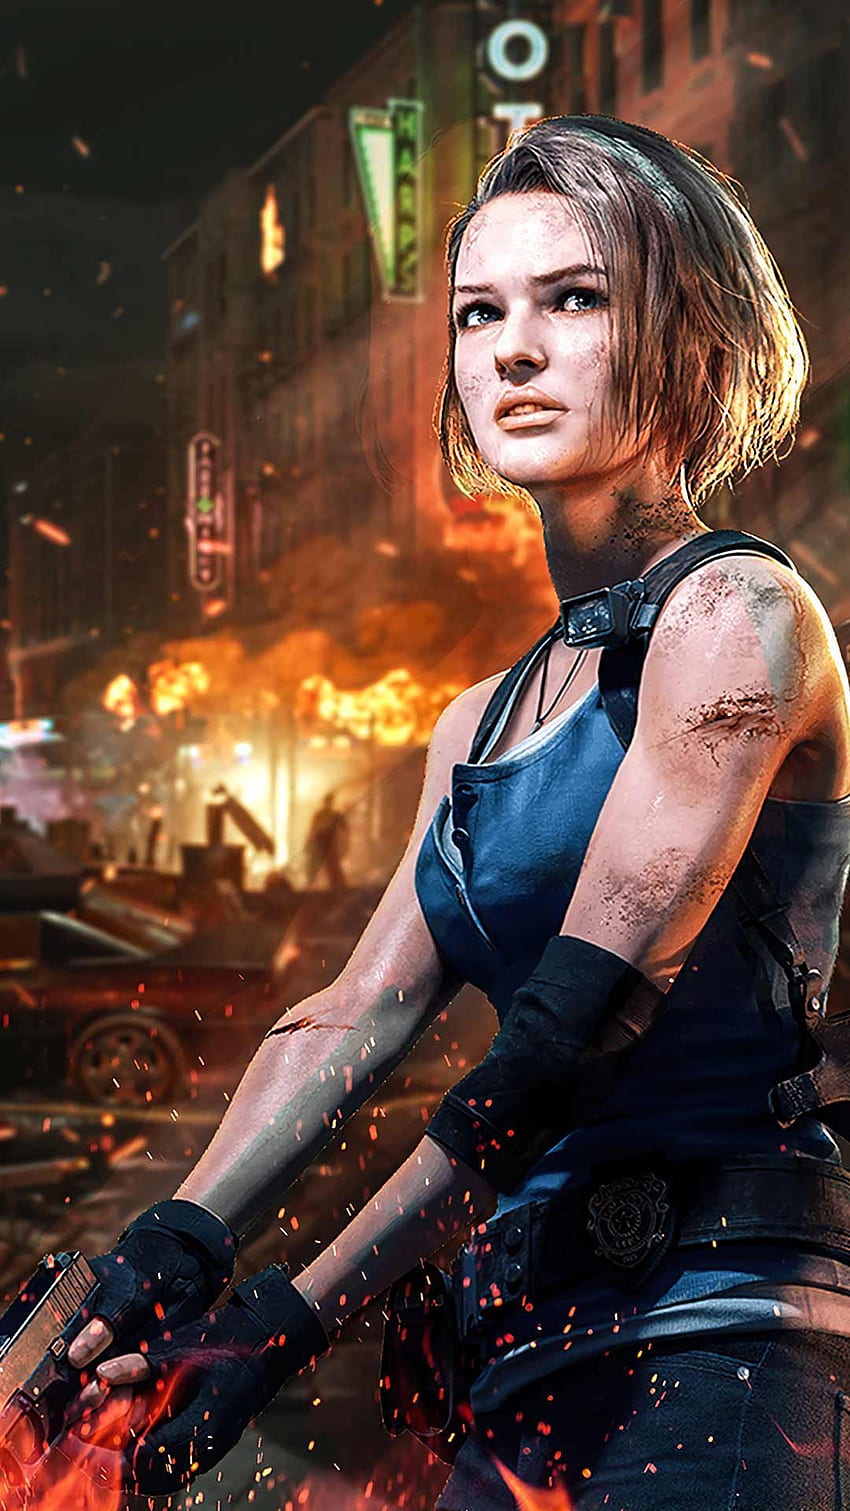 Jill valentine re3 remake phone background 2020 game art Poster on iPhone android. Resident evil girl, Resident evil anime, Resident evil 3 remake, Resident Evil 3 Phone HD phone wallpaper